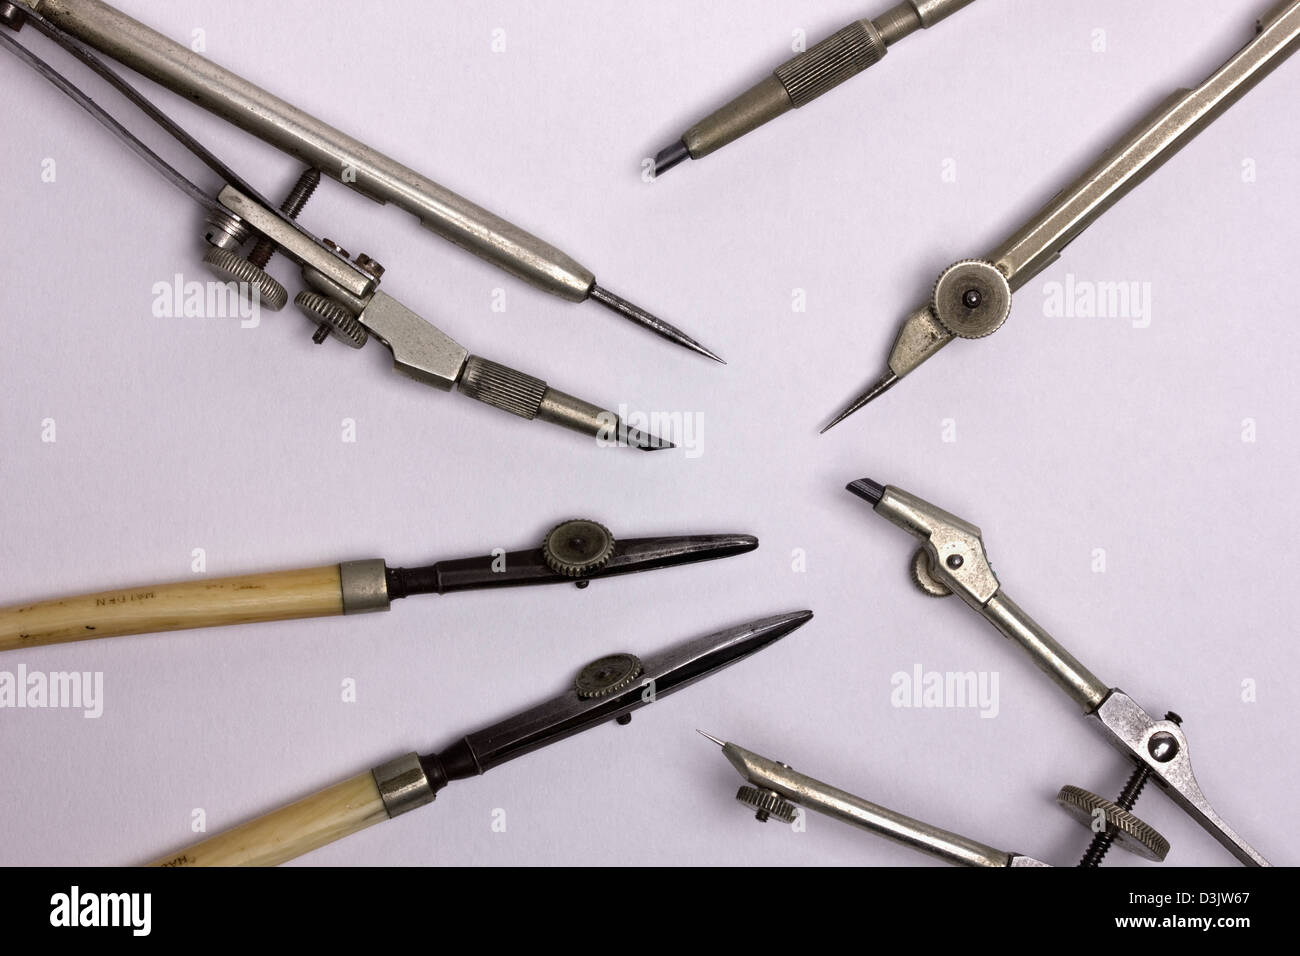 Old drawing instruments Stock Photo